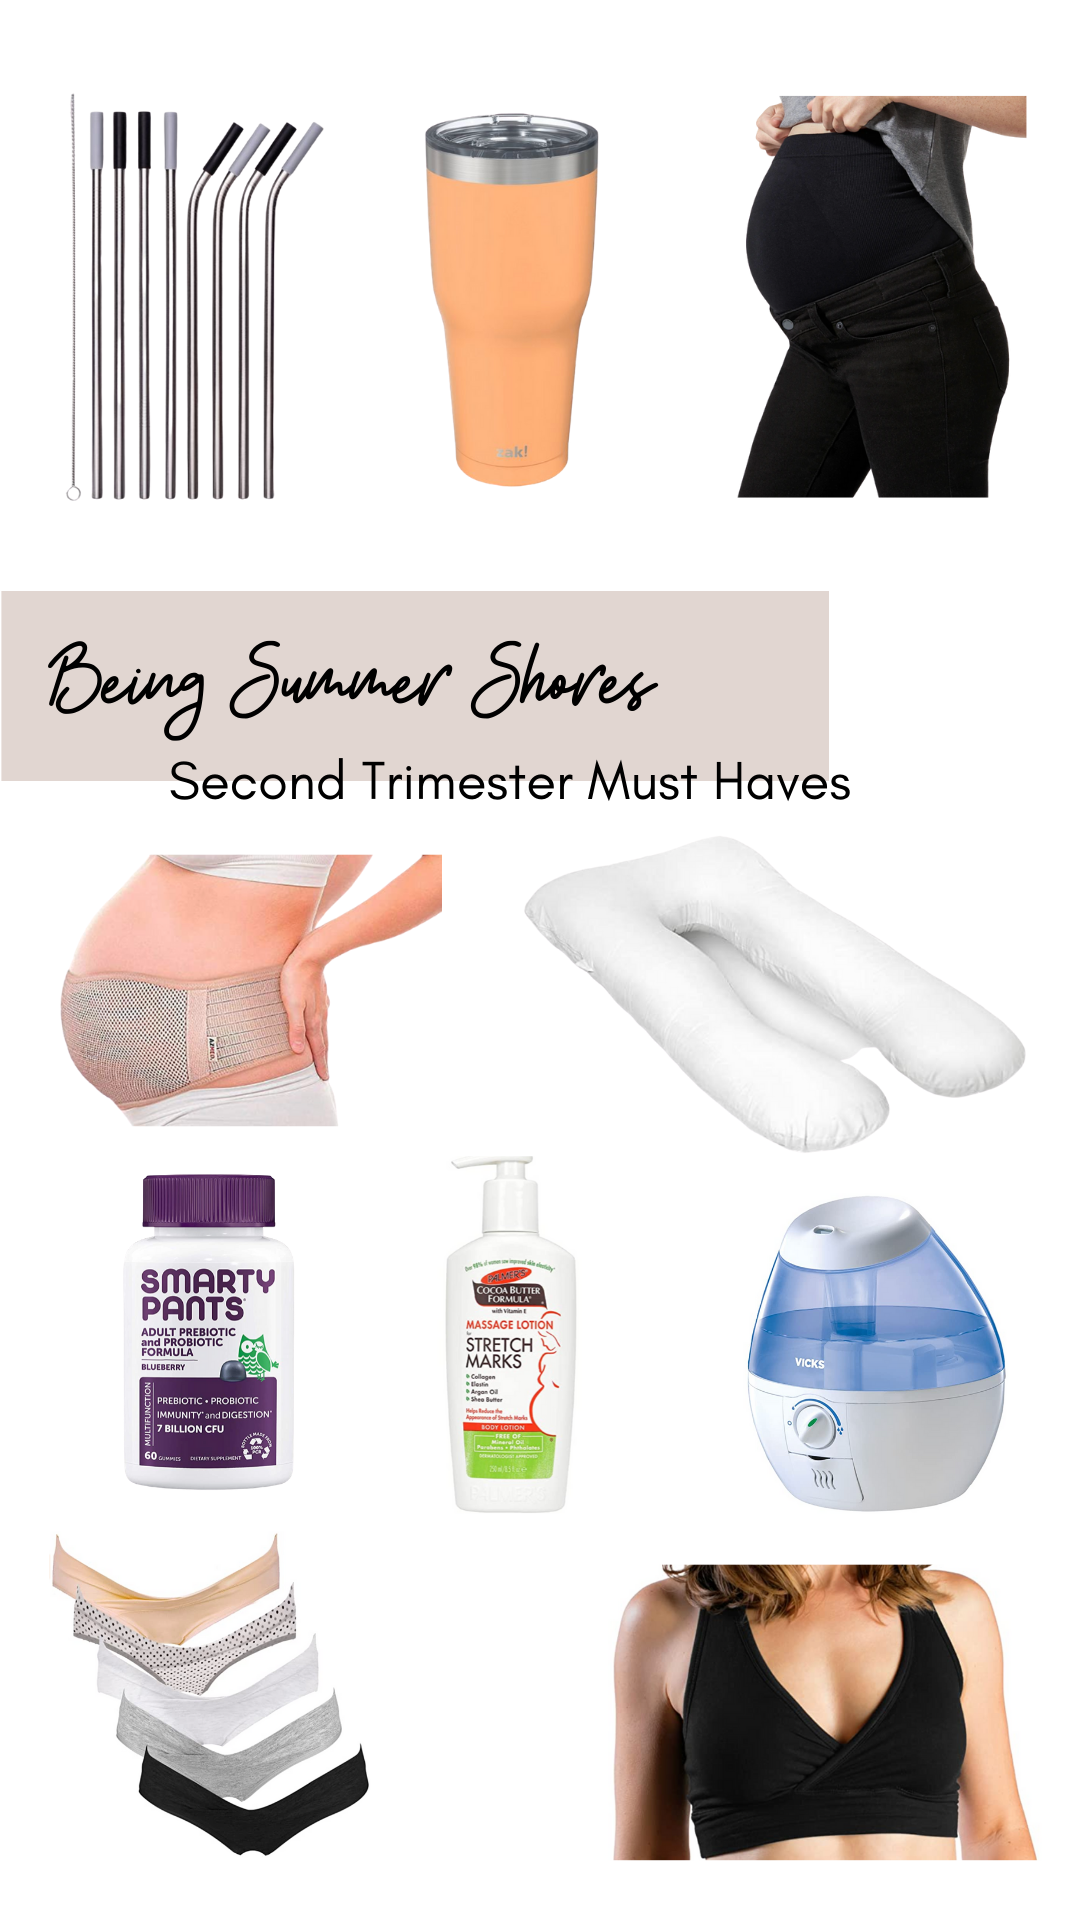 Second Trimester Must Haves - Being Summer Shores